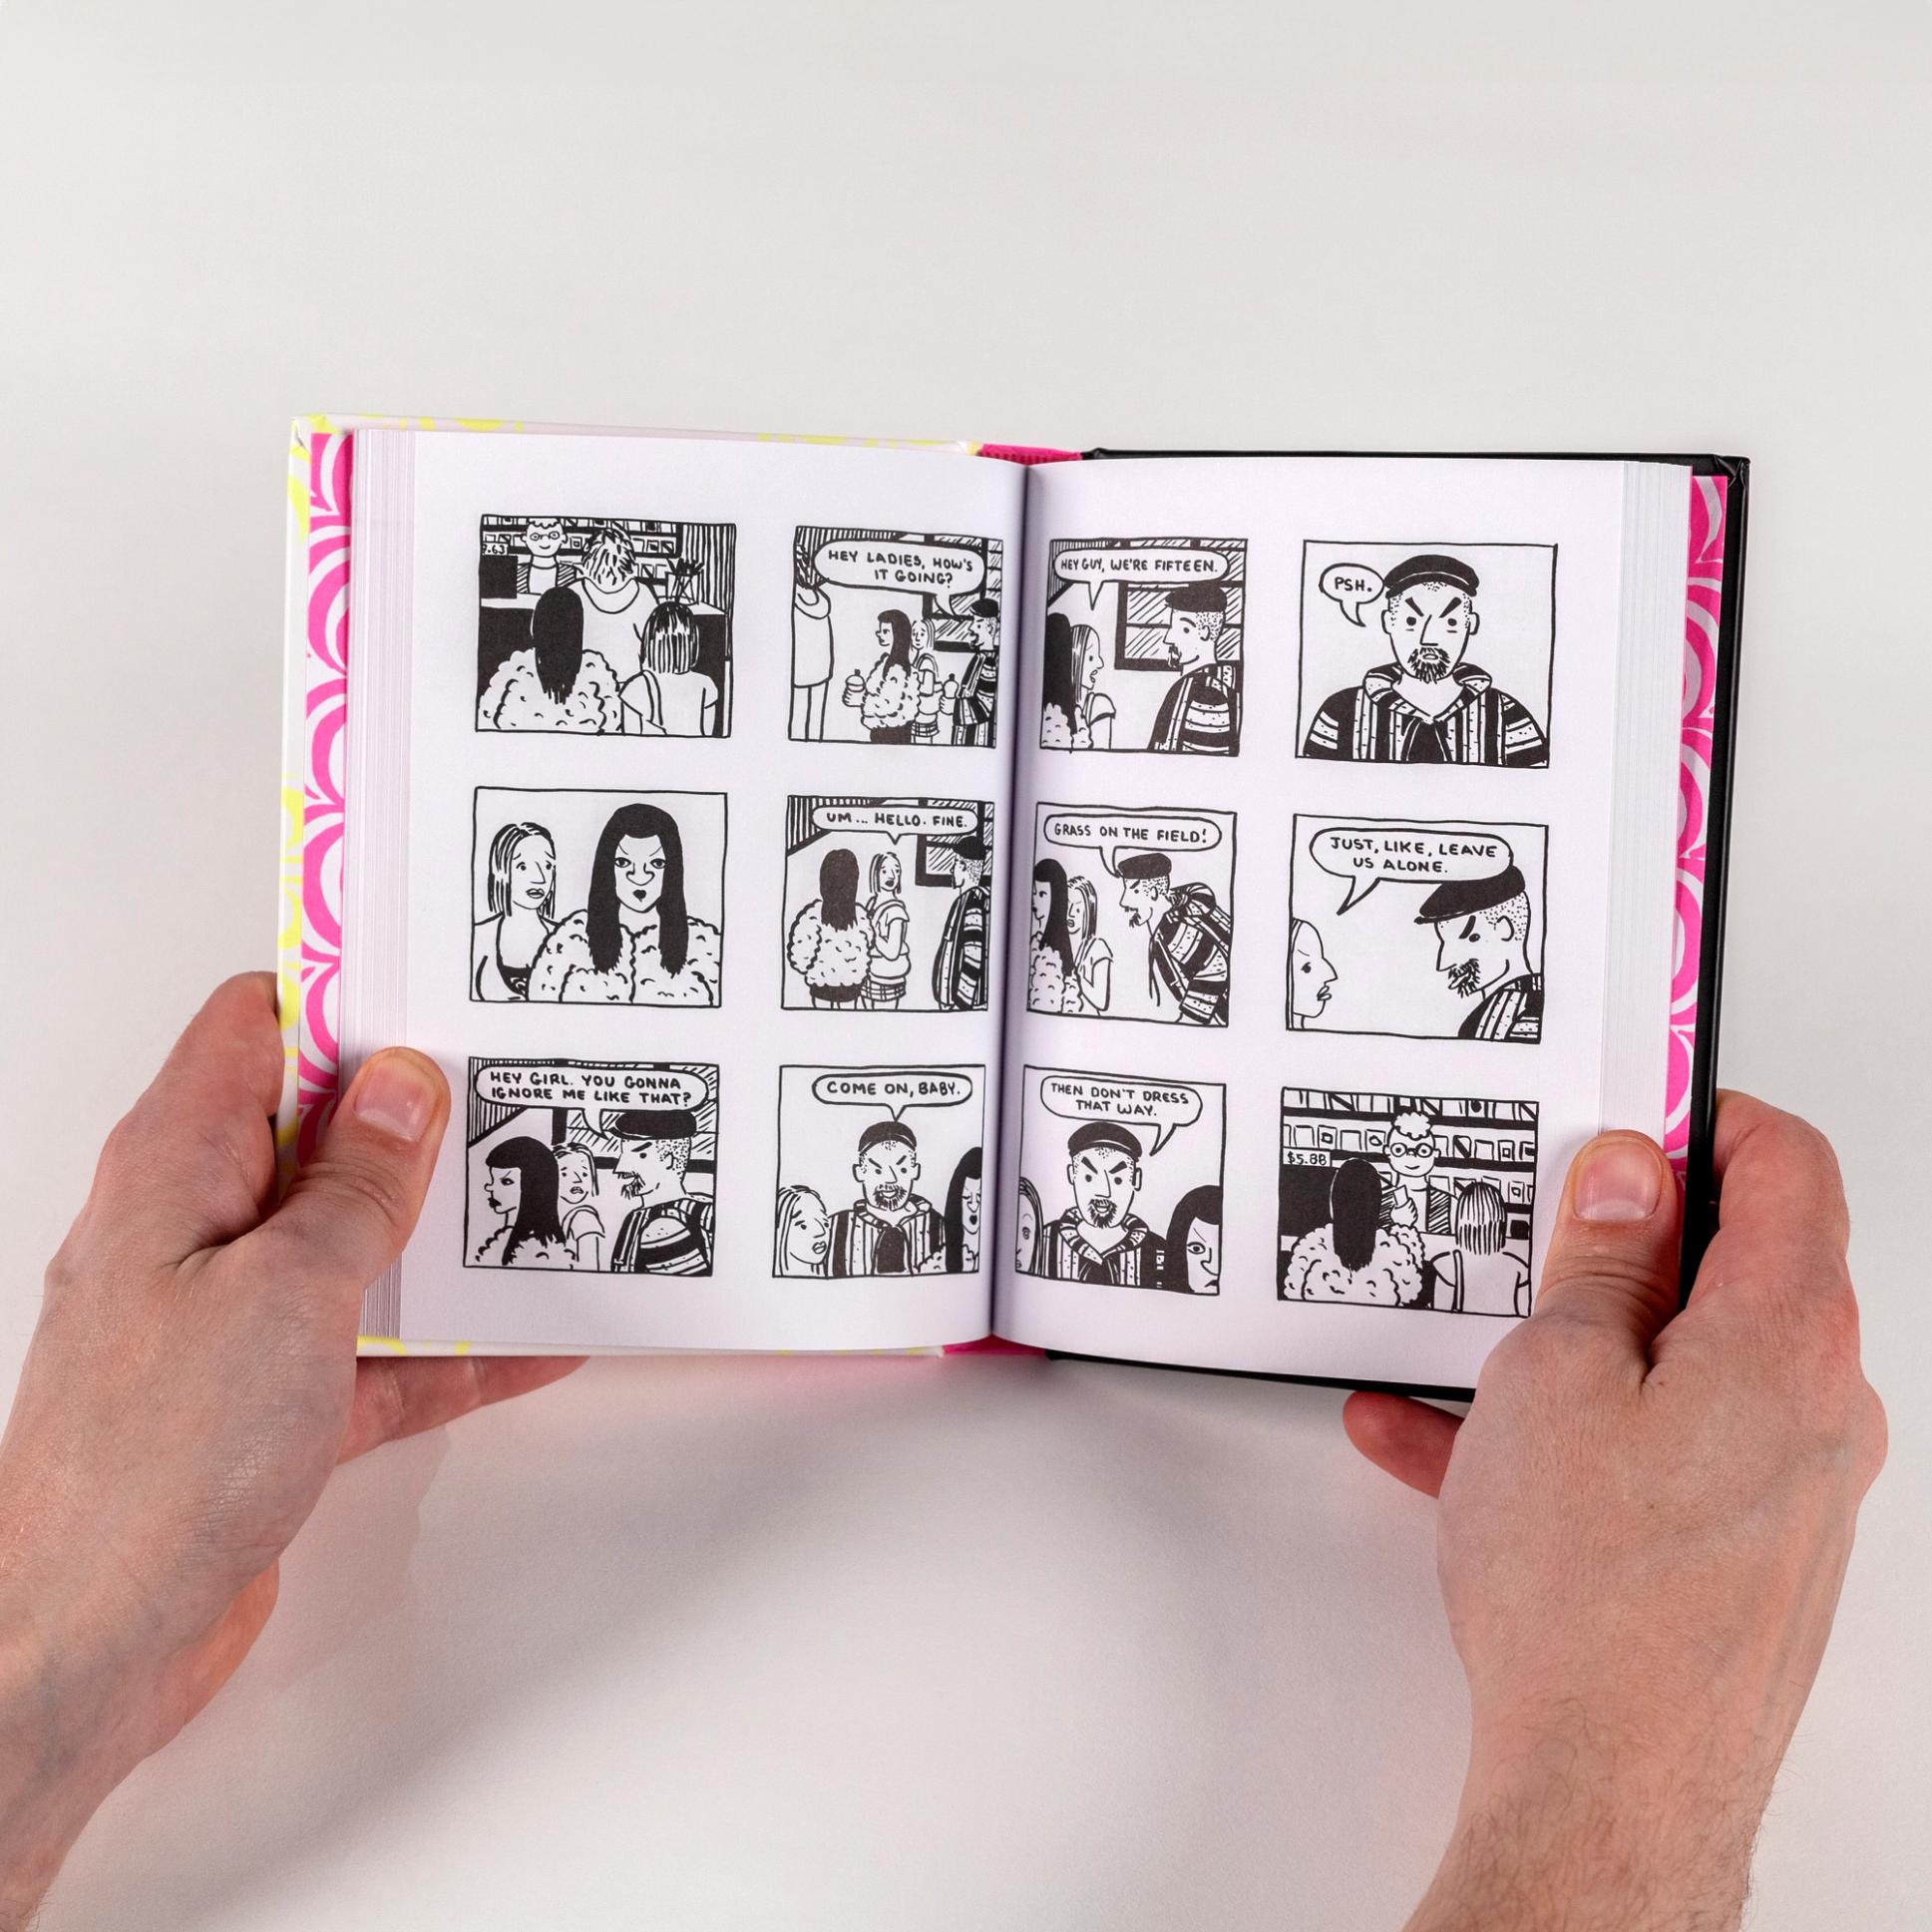 A photograph of two hands holding open a spread from a book. The book features cartoon panels of two young girls being verbally assaulted by a man.